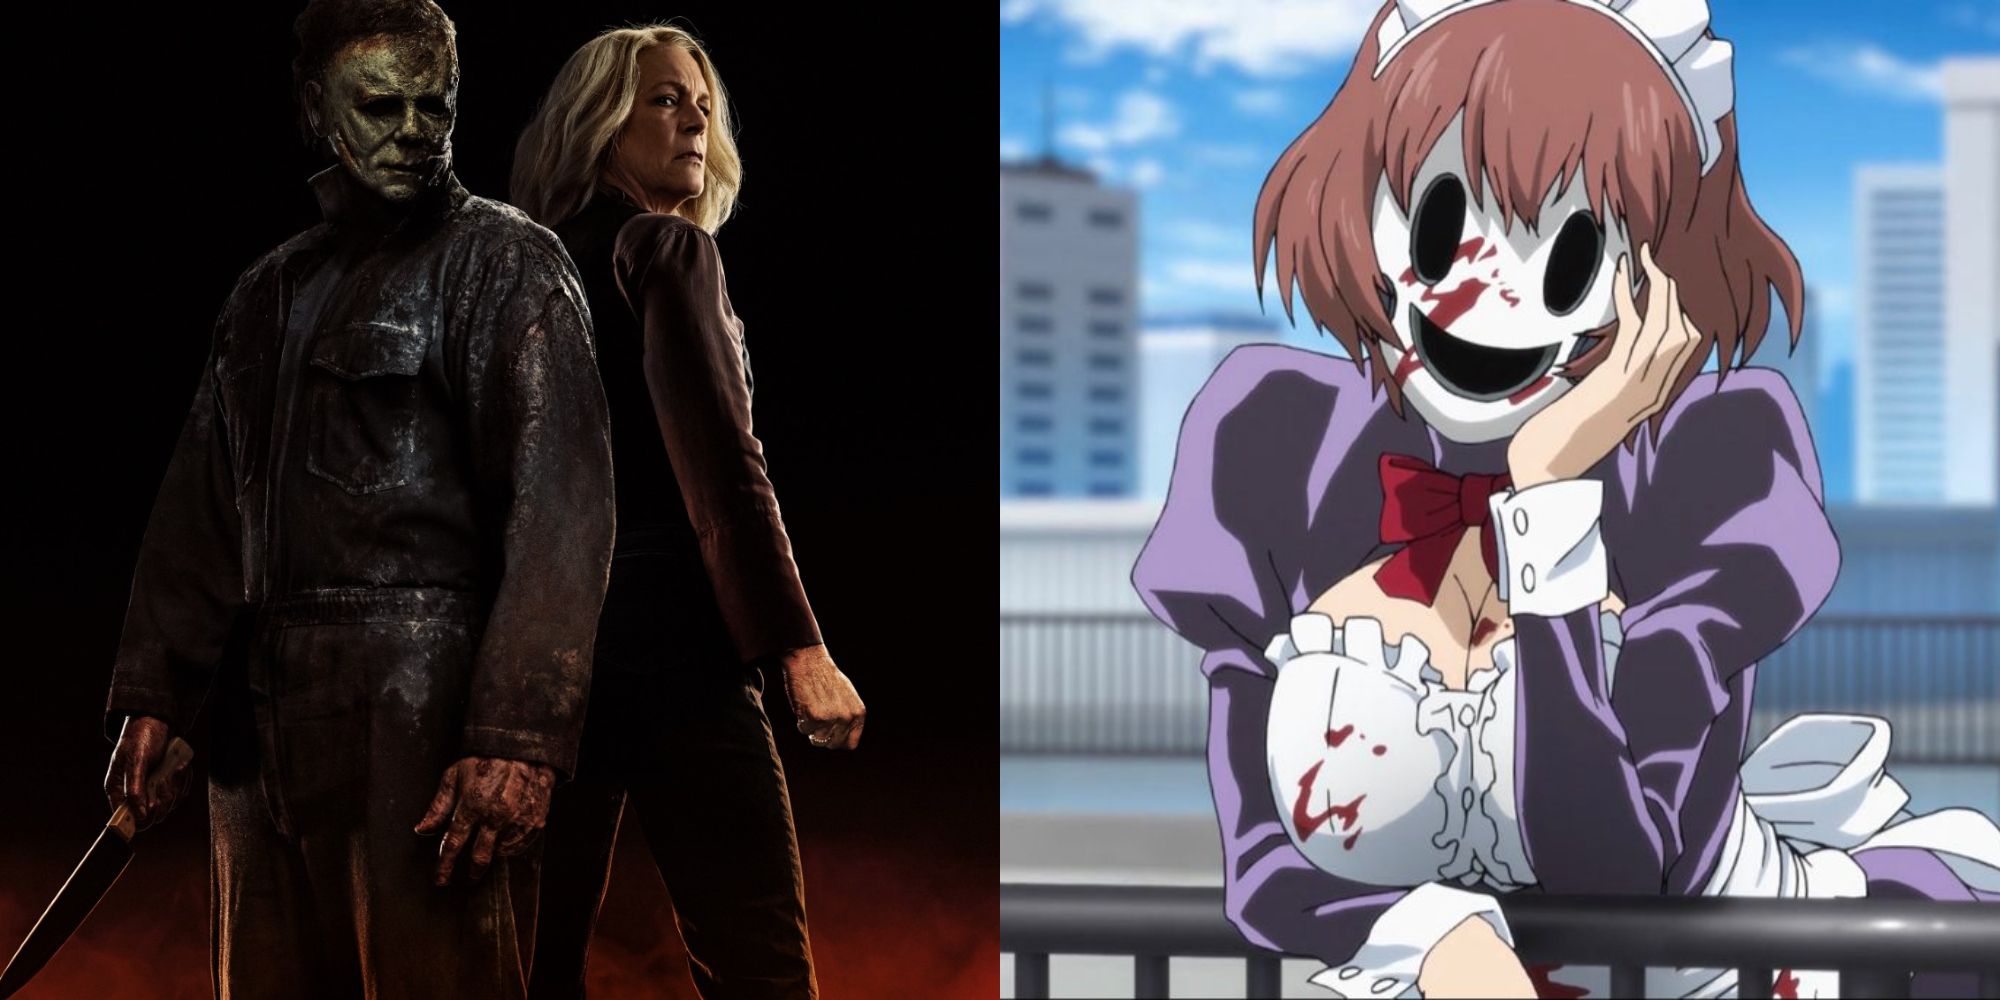 Split image showing Michael Myers and Laurie Strode on the poster for Halloween Ends and a character from High-Rise Invasion.